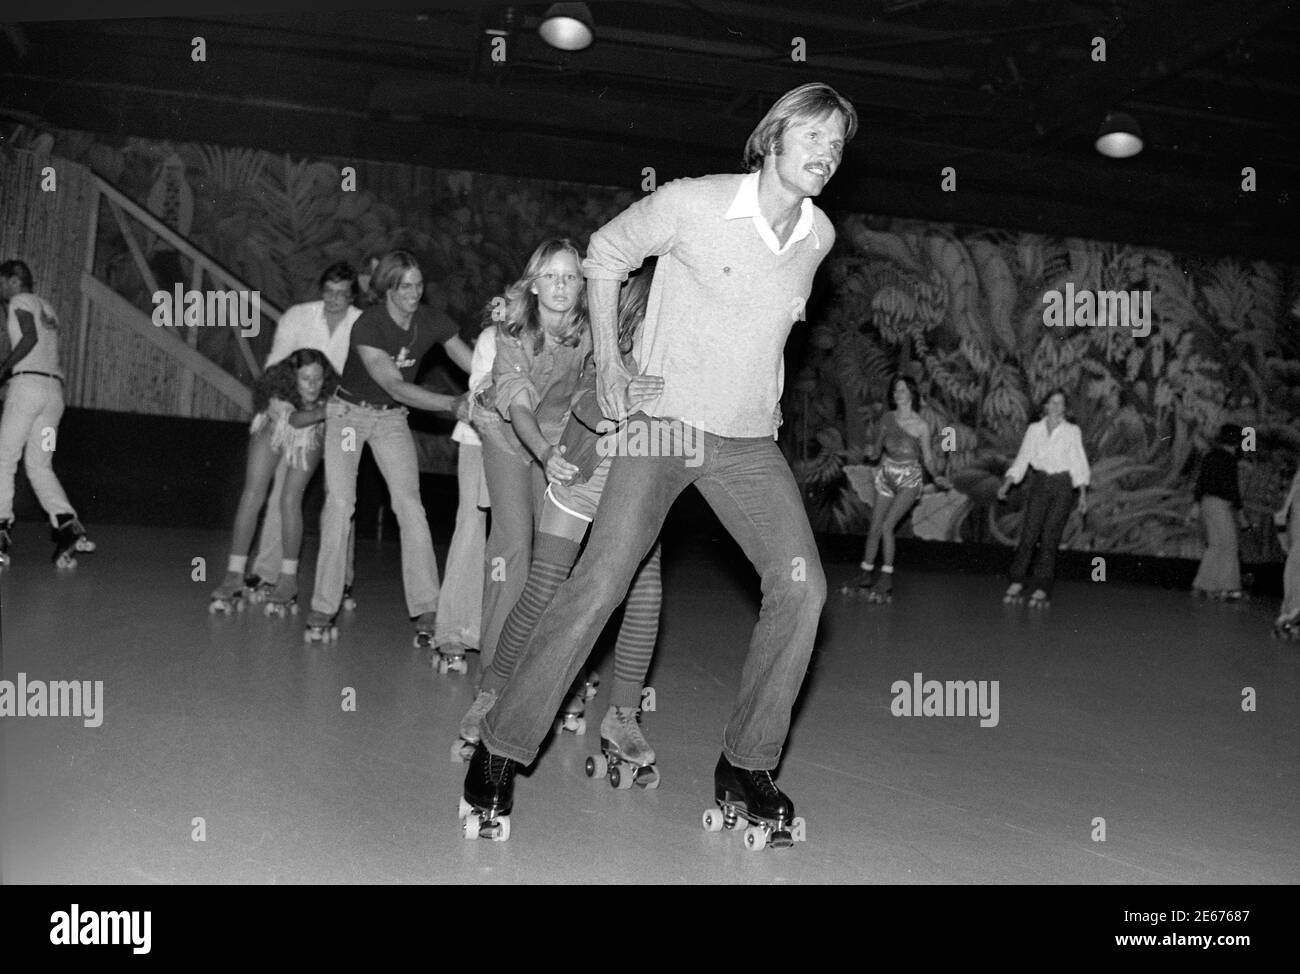 Roller skating rink Black and White Stock Photos & Images - Alamy